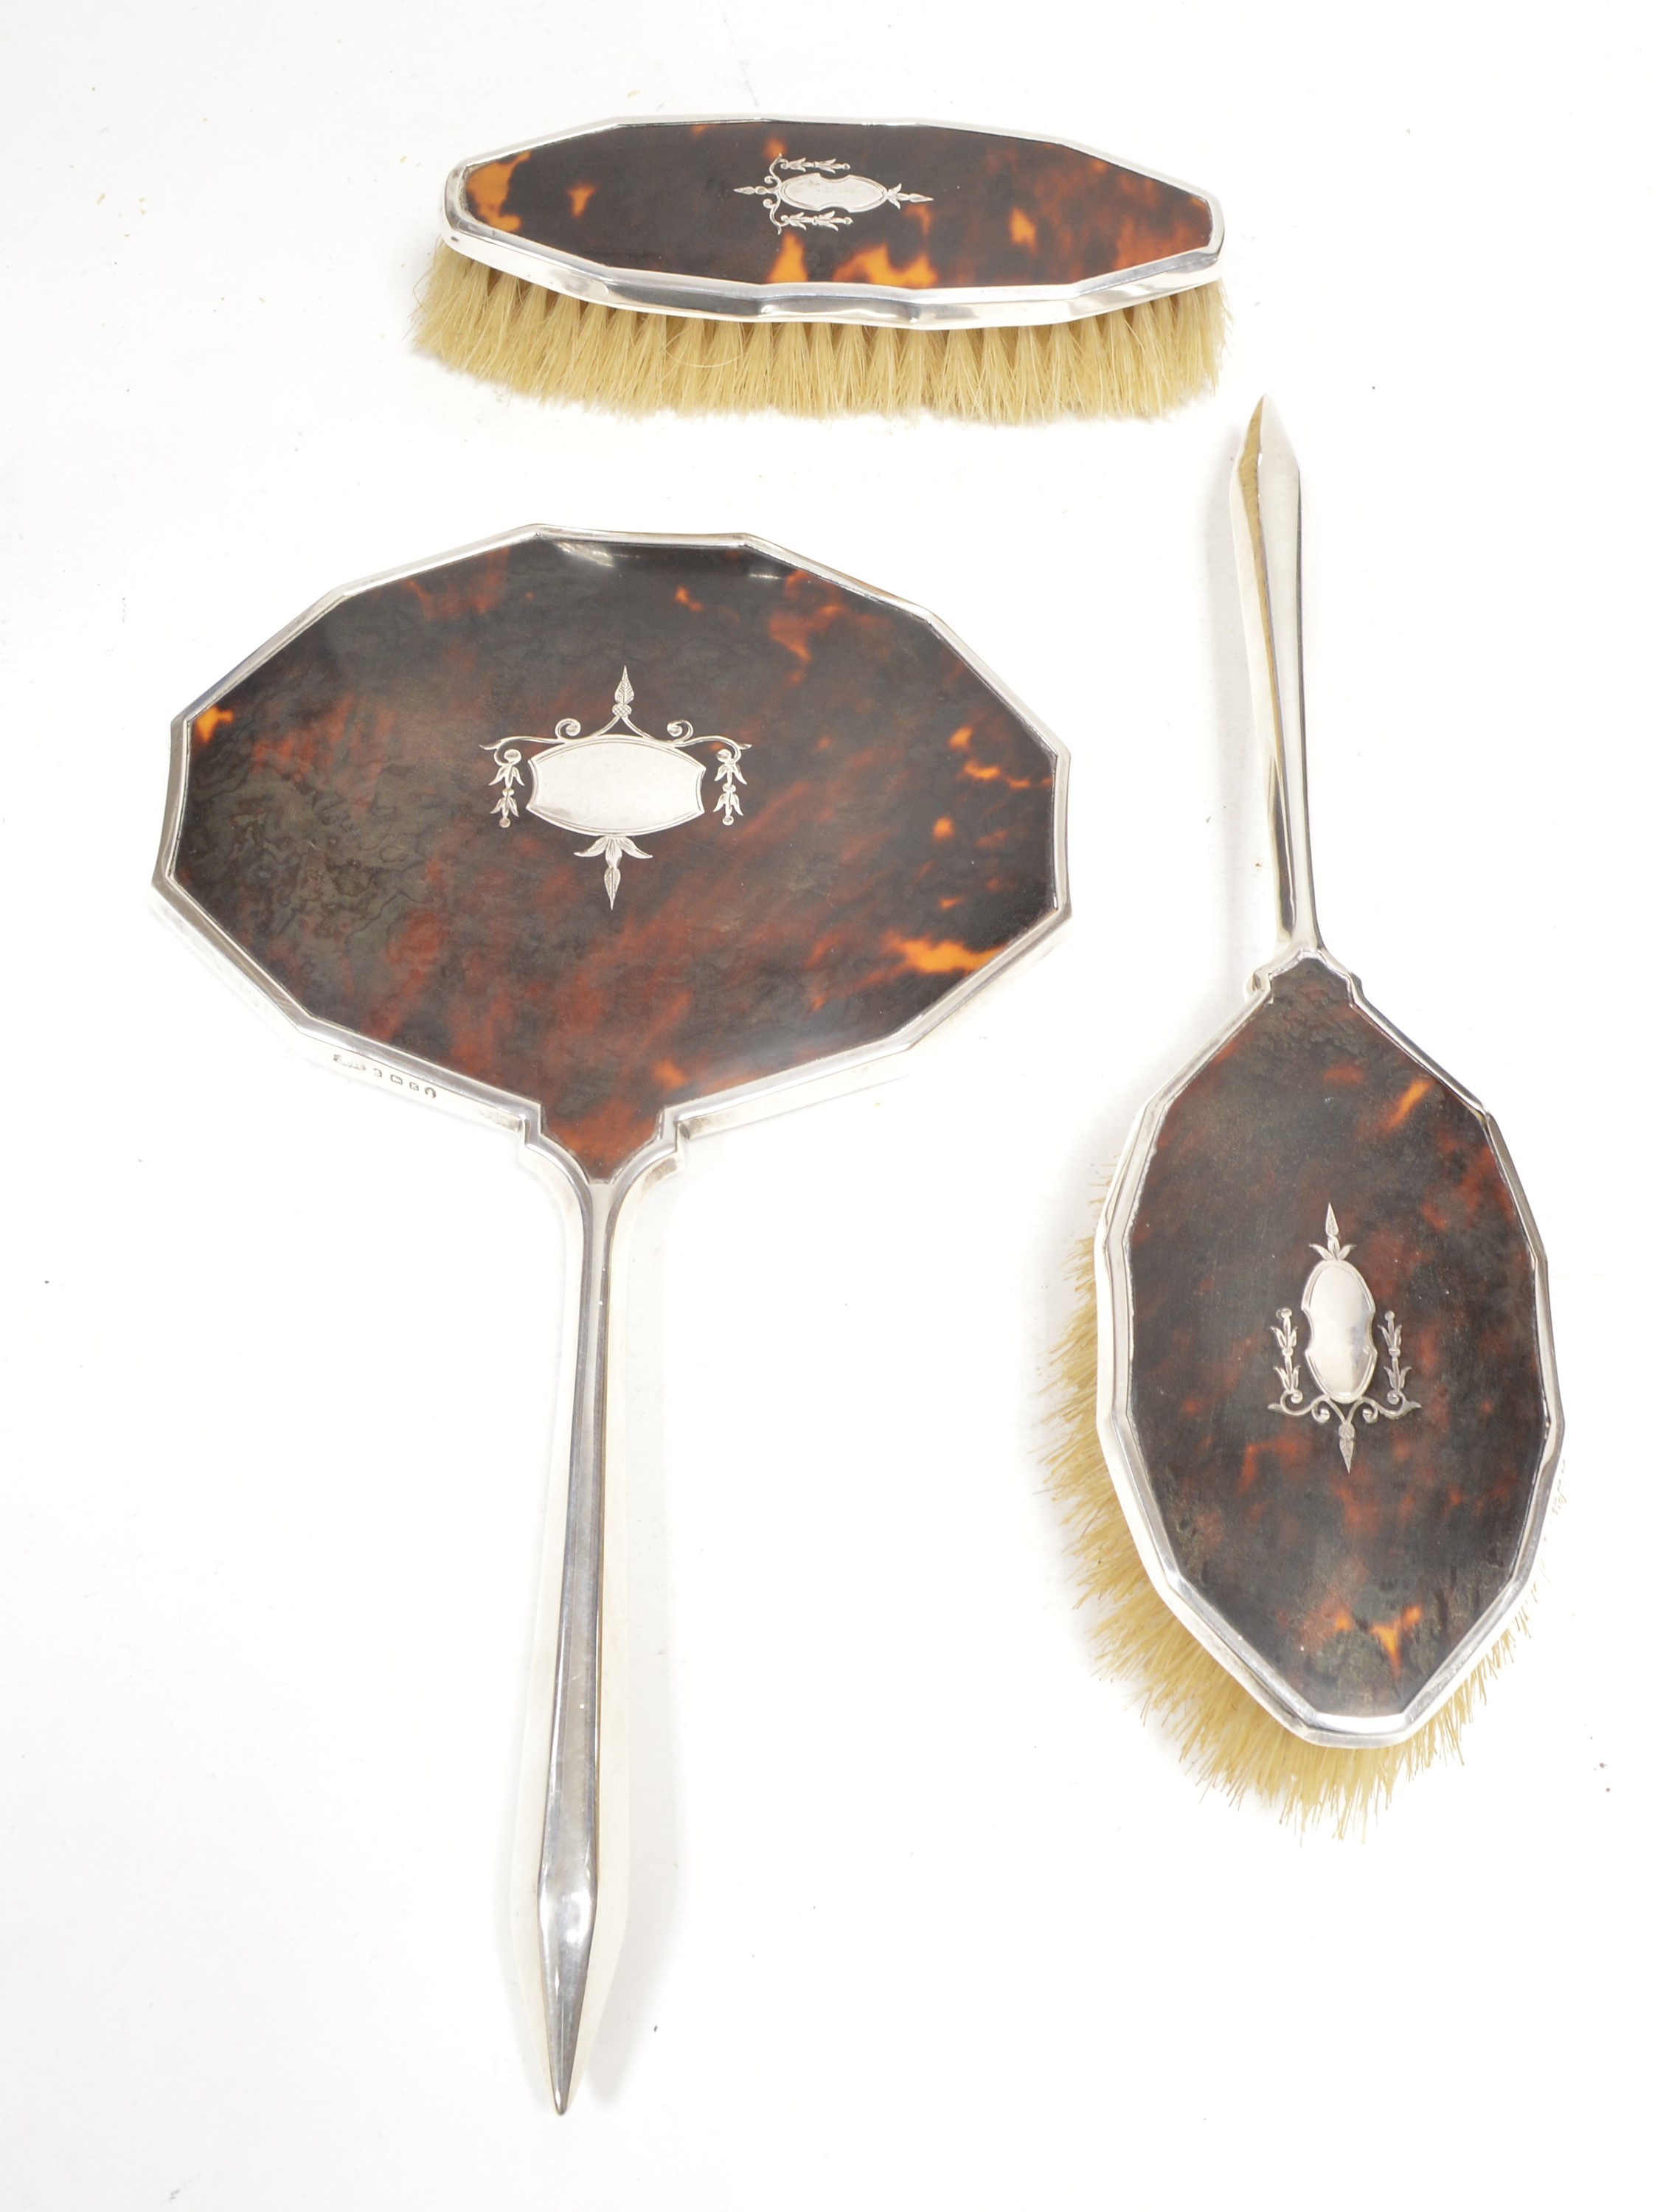 Silver and tortoise shell dressing table set by James Dixon & Sons Ltd